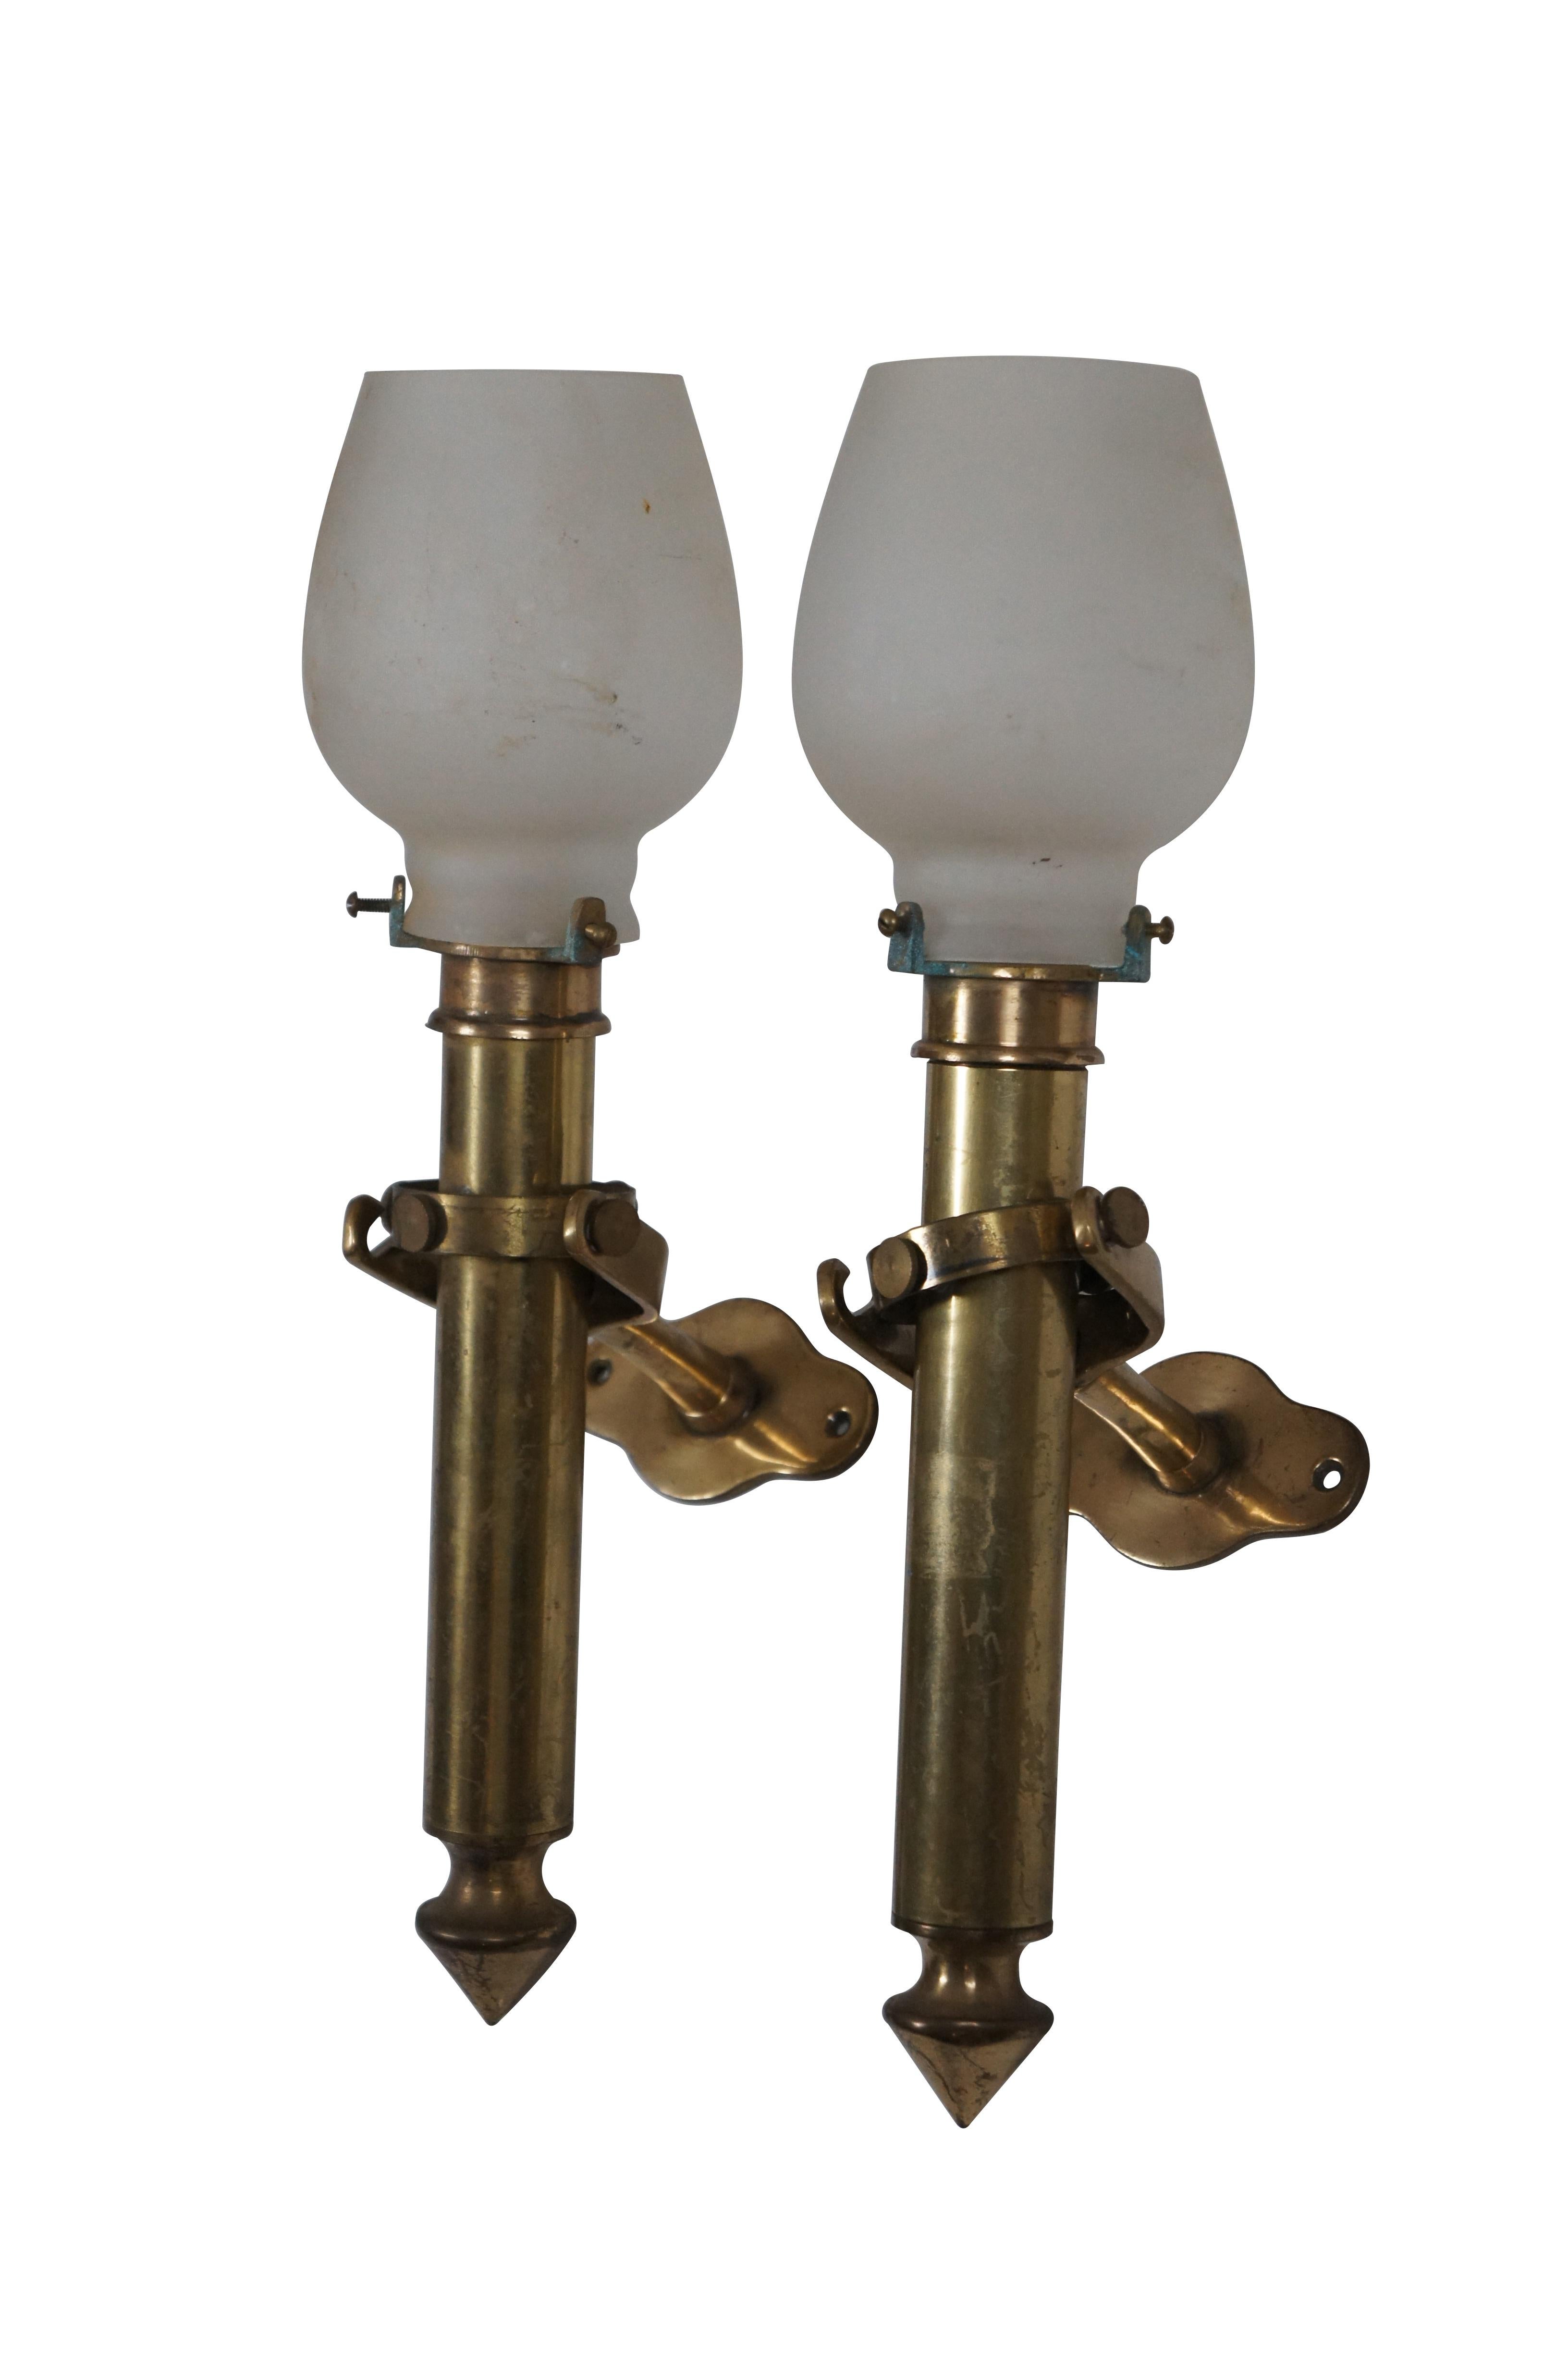 Pair of 19th century brass nautical / maritime / marine / railway / sailing ship's swiveling / gimbal wall sconce pair. Simple column design with pointed / weighted bases that can be removed from bracket for use and a handheld torchiere light.